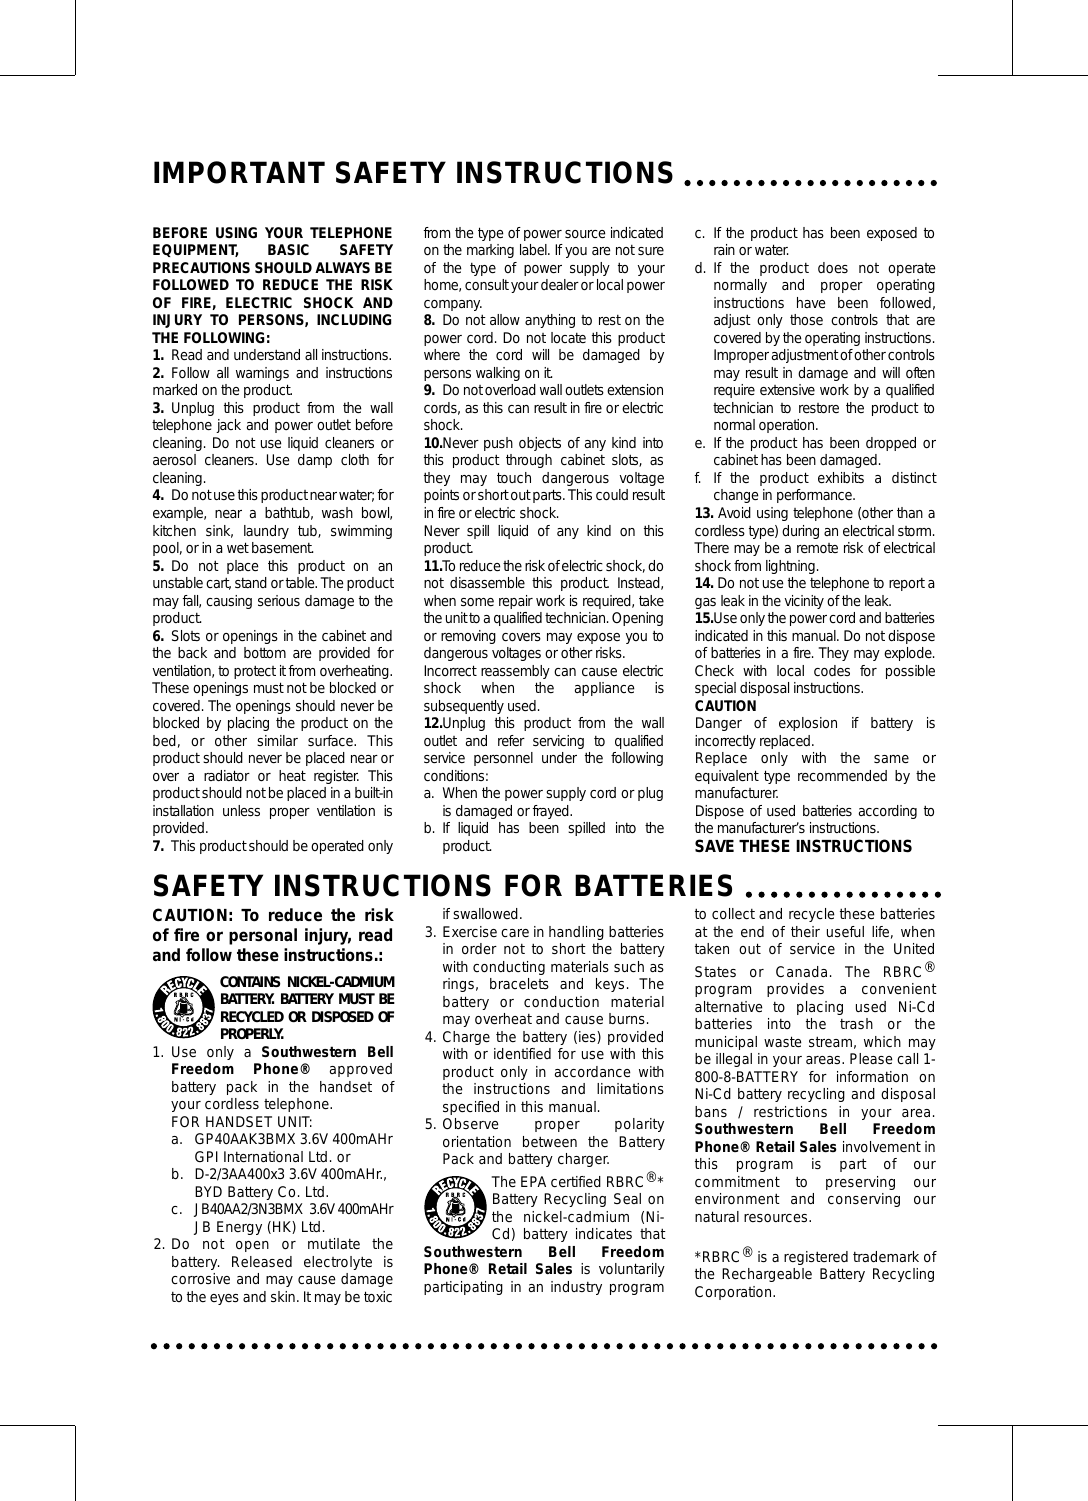 IMPORTANT SAFETY INSTRUCTIONSBEFORE USING YOUR TELEPHONEEQUIPMENT, BASIC SAFETYPRECAUTIONS SHOULD ALWAYS BEFOLLOWED TO REDUCE THE RISKOF FIRE, ELECTRIC SHOCK ANDINJURY TO PERSONS, INCLUDINGTHE FOLLOWING:1. Read and understand all instructions.2. Follow all warnings and instructionsmarked on the product.3. Unplug this product from the walltelephone jack and power outlet beforecleaning. Do not use liquid cleaners oraerosol cleaners. Use damp cloth forcleaning.4. Do not use this product near water; forexample, near a bathtub, wash bowl,kitchen sink, laundry tub, swimmingpool, or in a wet basement.5. Do not place this product on anunstable cart, stand or table. The productmay fall, causing serious damage to theproduct.6. Slots or openings in the cabinet andthe back and bottom are provided forventilation, to protect it from overheating.These openings must not be blocked orcovered. The openings should never beblocked by placing the product on thebed, or other similar surface. Thisproduct should never be placed near orover a radiator or heat register. Thisproduct should not be placed in a built-ininstallation unless proper ventilation isprovided.7. This product should be operated onlyfrom the type of power source indicatedon the marking label. If you are not sureof the type of power supply to yourhome, consult your dealer or local powercompany.8. Do not allow anything to rest on thepower cord. Do not locate this productwhere the cord will be damaged bypersons walking on it.9. Do not overload wall outlets extensioncords, as this can result in fire or electricshock.10.Never push objects of any kind intothis product through cabinet slots, asthey may touch dangerous voltagepoints or short out parts. This could resultin fire or electric shock.Never spill liquid of any kind on thisproduct.11.To reduce the risk of electric shock, donot disassemble this product. Instead,when some repair work is required, takethe unit to a qualified technician. Openingor removing covers may expose you todangerous voltages or other risks.Incorrect reassembly can cause electricshock when the appliance issubsequently used.12.Unplug this product from the walloutlet and refer servicing to qualifiedservice personnel under the followingconditions:a. When the power supply cord or plugis damaged or frayed.b. If liquid has been spilled into theproduct.c. If the product has been exposed torain or water.d. If the product does not operatenormally and proper operatinginstructions have been followed,adjust only those controls that arecovered by the operating instructions.Improper adjustment of other controlsmay result in damage and will oftenrequire extensive work by a qualifiedtechnician to restore the product tonormal operation.e. If the product has been dropped orcabinet has been damaged.f. If the product exhibits a distinctchange in performance.13. Avoid using telephone (other than acordless type) during an electrical storm.There may be a remote risk of electricalshock from lightning.14. Do not use the telephone to report agas leak in the vicinity of the leak.15.Use only the power cord and batteriesindicated in this manual. Do not disposeof batteries in a fire. They may explode.Check with local codes for possiblespecial disposal instructions.CAUTIONDanger of explosion if battery isincorrectly replaced.Replace only with the same orequivalent type recommended by themanufacturer.Dispose of used batteries according tothe manufacturer’s instructions.SAVE THESE INSTRUCTIONSSAFETY INSTRUCTIONS FOR BATTERIESCAUTION: To reduce the riskof fire or personal injury, readand follow these instructions.:CONTAINS NICKEL-CADMIUMBATTERY. BATTERY MUST BERECYCLED OR DISPOSED OFPROPERLY.1. Use only a Southwestern BellFreedom Phone® approvedbattery pack in the handset ofyour cordless telephone.FOR HANDSET UNIT:a. GP40AAK3BMX 3.6V 400mAHrGPI International Ltd. orb. D-2/3AA400x3 3.6V 400mAHr.,BYD Battery Co. Ltd.c. JB40AA2/3N3BMX  3.6V 400mAHrJB Energy (HK) Ltd.2. Do not open or mutilate thebattery. Released electrolyte iscorrosive and may cause damageto the eyes and skin. It may be toxicif swallowed.3. Exercise care in handling batteriesin order not to short the batterywith conducting materials such asrings, bracelets and keys. Thebattery or conduction materialmay overheat and cause burns.4. Charge the battery (ies) providedwith or identified for use with thisproduct only in accordance withthe instructions and limitationsspecified in this manual.5. Observe proper polarityorientation between the BatteryPack and battery charger.The EPA certified RBRC®*Battery Recycling Seal onthe nickel-cadmium (Ni-Cd) battery indicates thatSouthwestern Bell FreedomPhone® Retail Sales is voluntarilyparticipating in an industry programto collect and recycle these batteriesat the end of their useful life, whentaken out of service in the UnitedStates or Canada. The RBRC®program provides a convenientalternative to placing used Ni-Cdbatteries into the trash or themunicipal waste stream, which maybe illegal in your areas. Please call 1-800-8-BATTERY for information onNi-Cd battery recycling and disposalbans / restrictions in your area.Southwestern Bell FreedomPhone® Retail Sales involvement inthis program is part of ourcommitment to preserving ourenvironment and conserving ournatural resources.*RBRC®is a registered trademark ofthe Rechargeable Battery RecyclingCorporation.